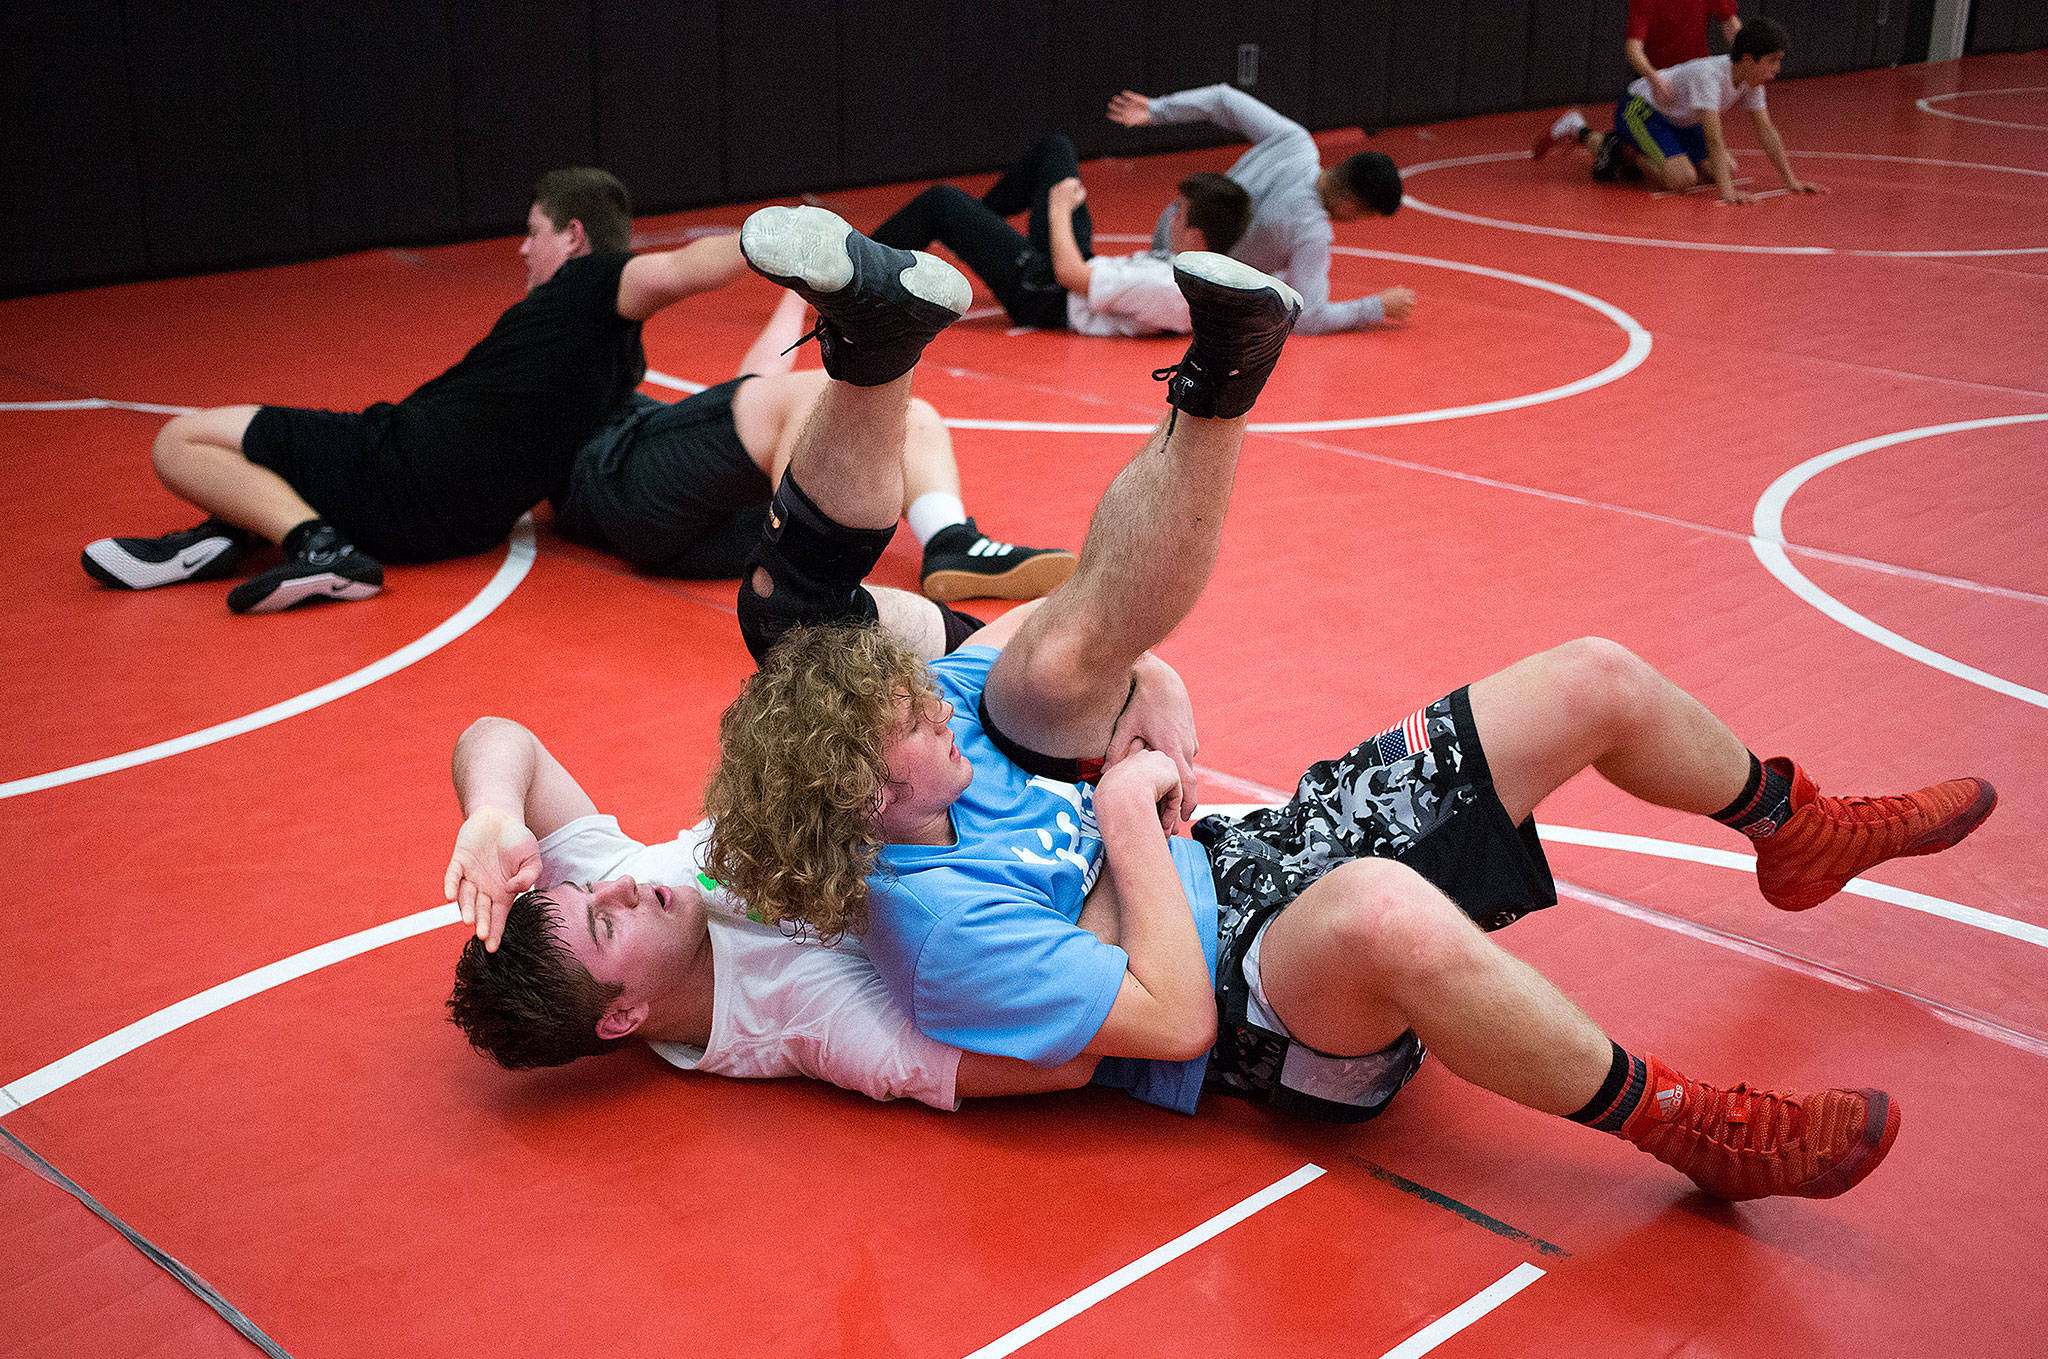 Snohomish’s Dylan Wheeler (right) and Matt Currier wrestle during the Panthers’ Dec. 11 practice in Snohomish. (Andy Bronson / The Herald)